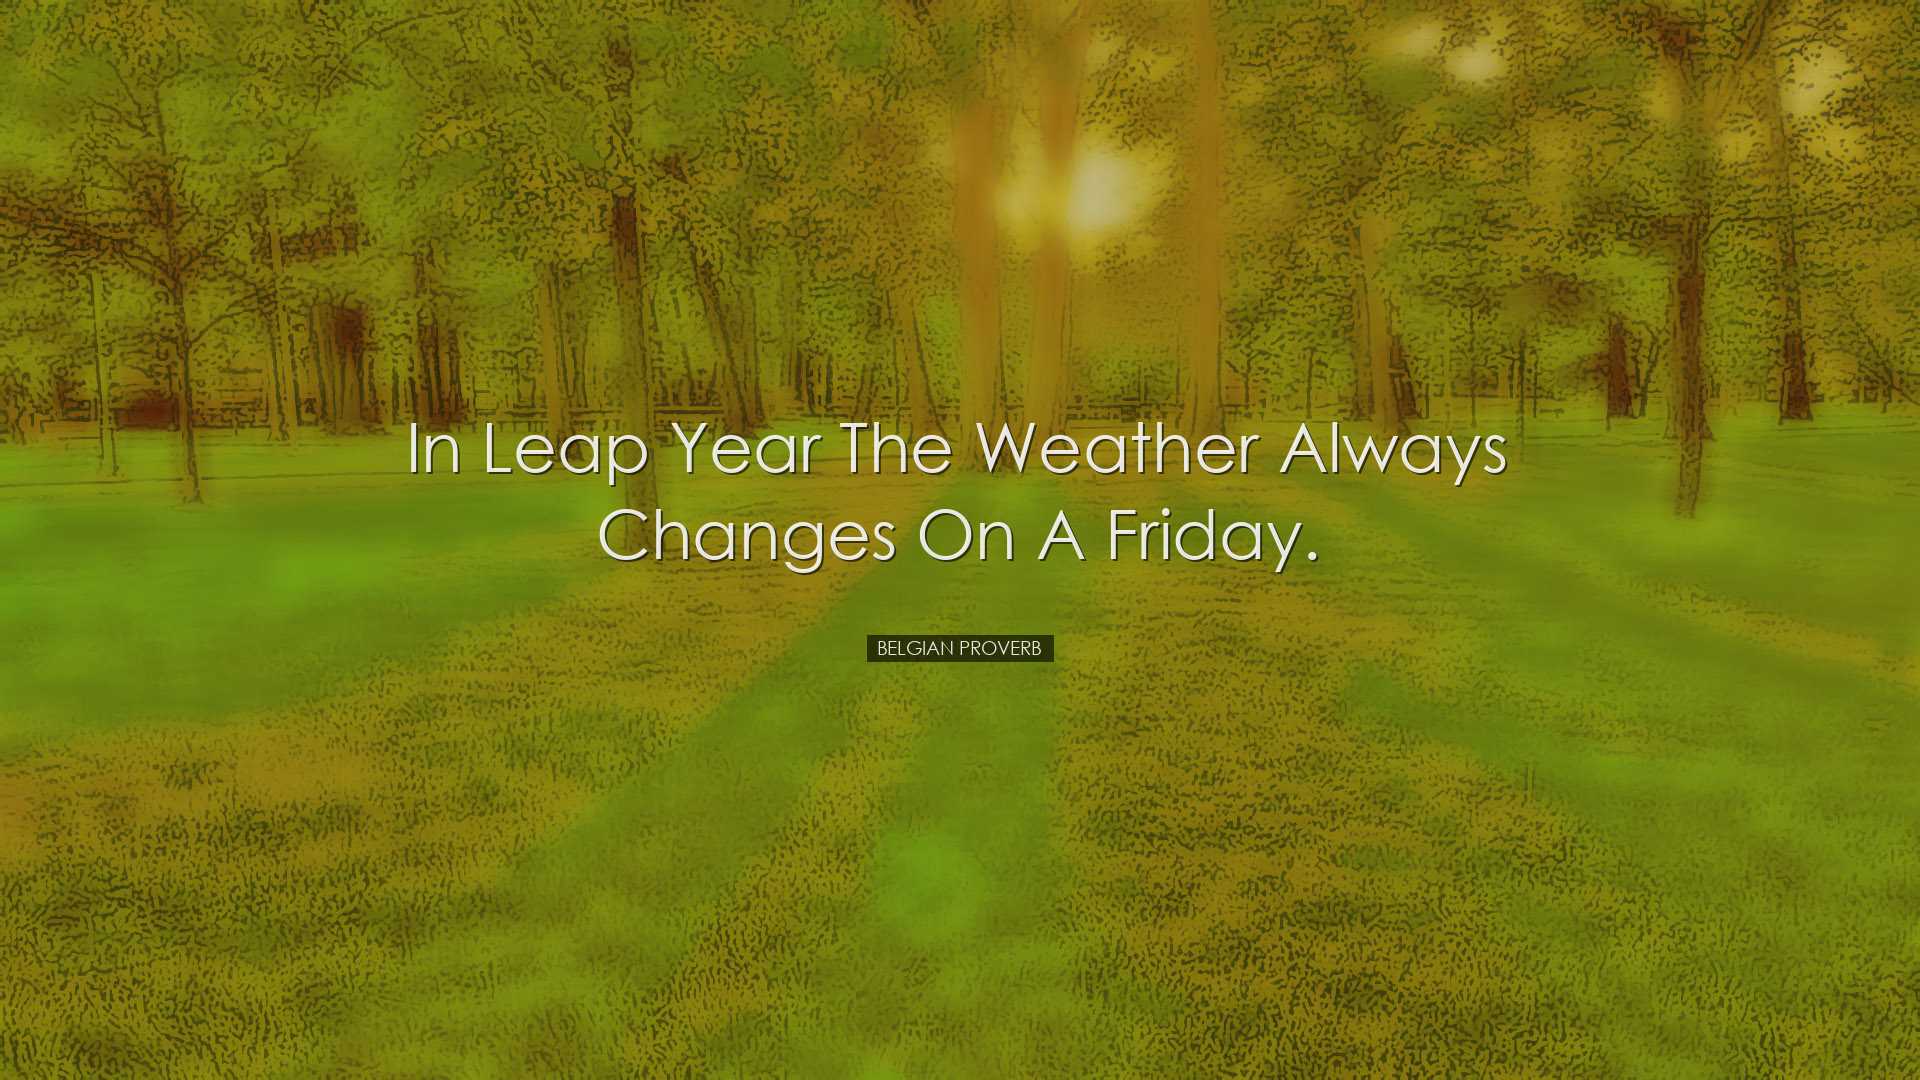 In Leap Year the weather always changes on a Friday. - Belgian pro